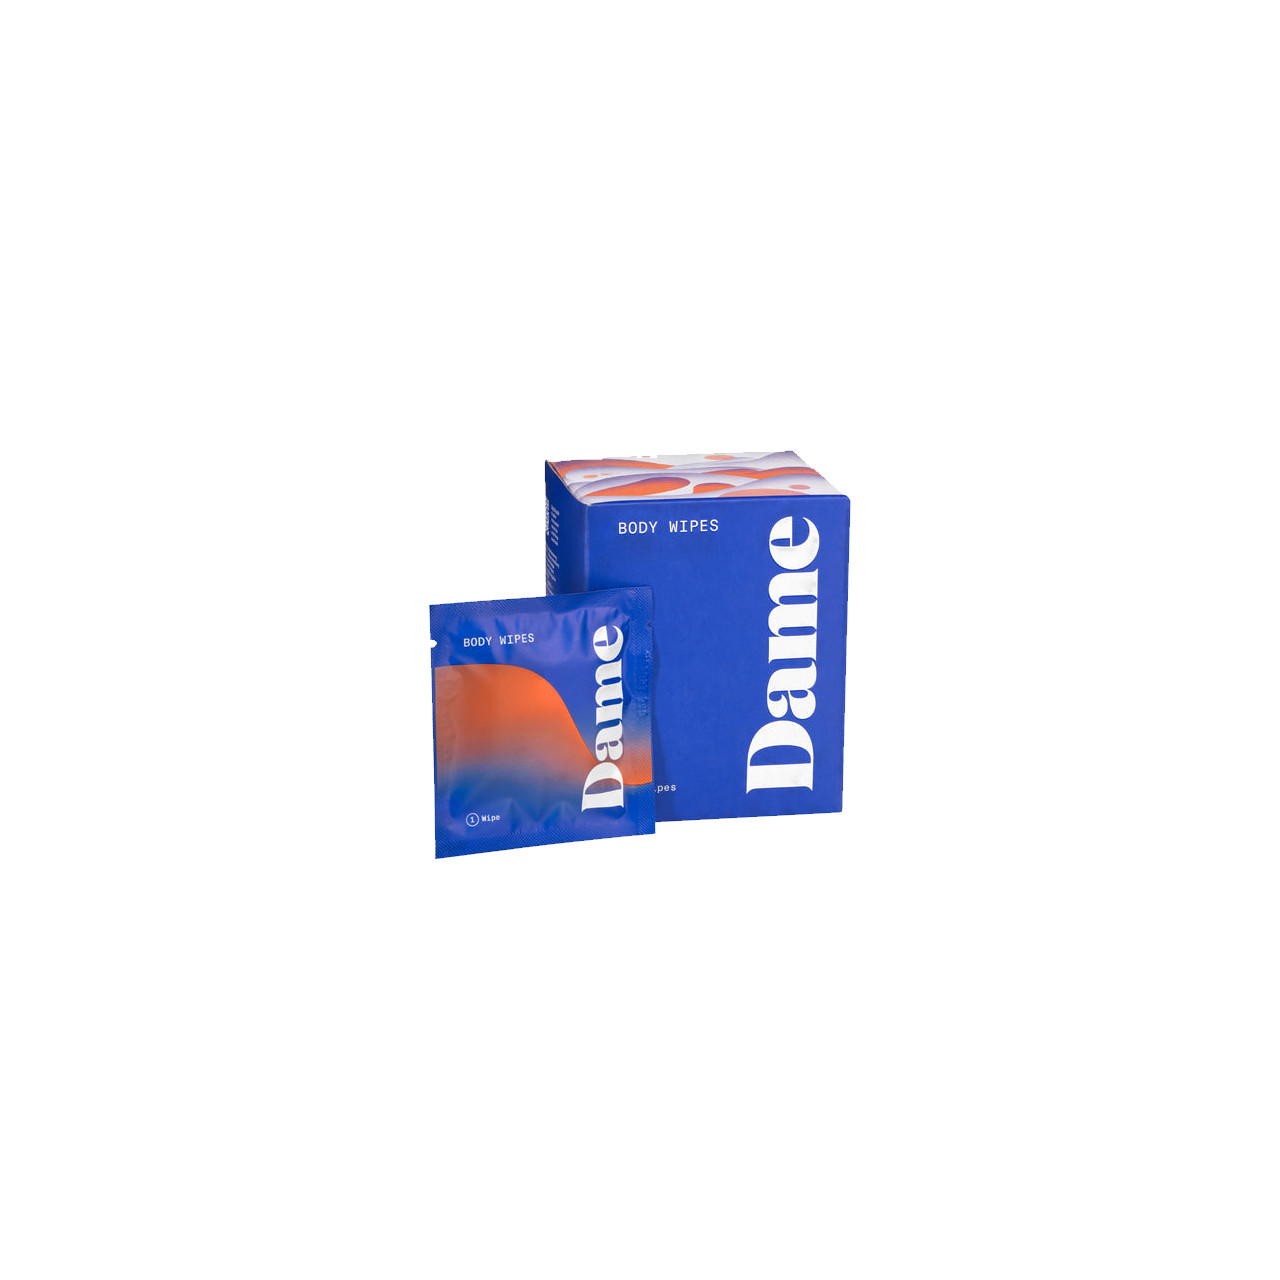 Dame Body Wipes Individually Packaged